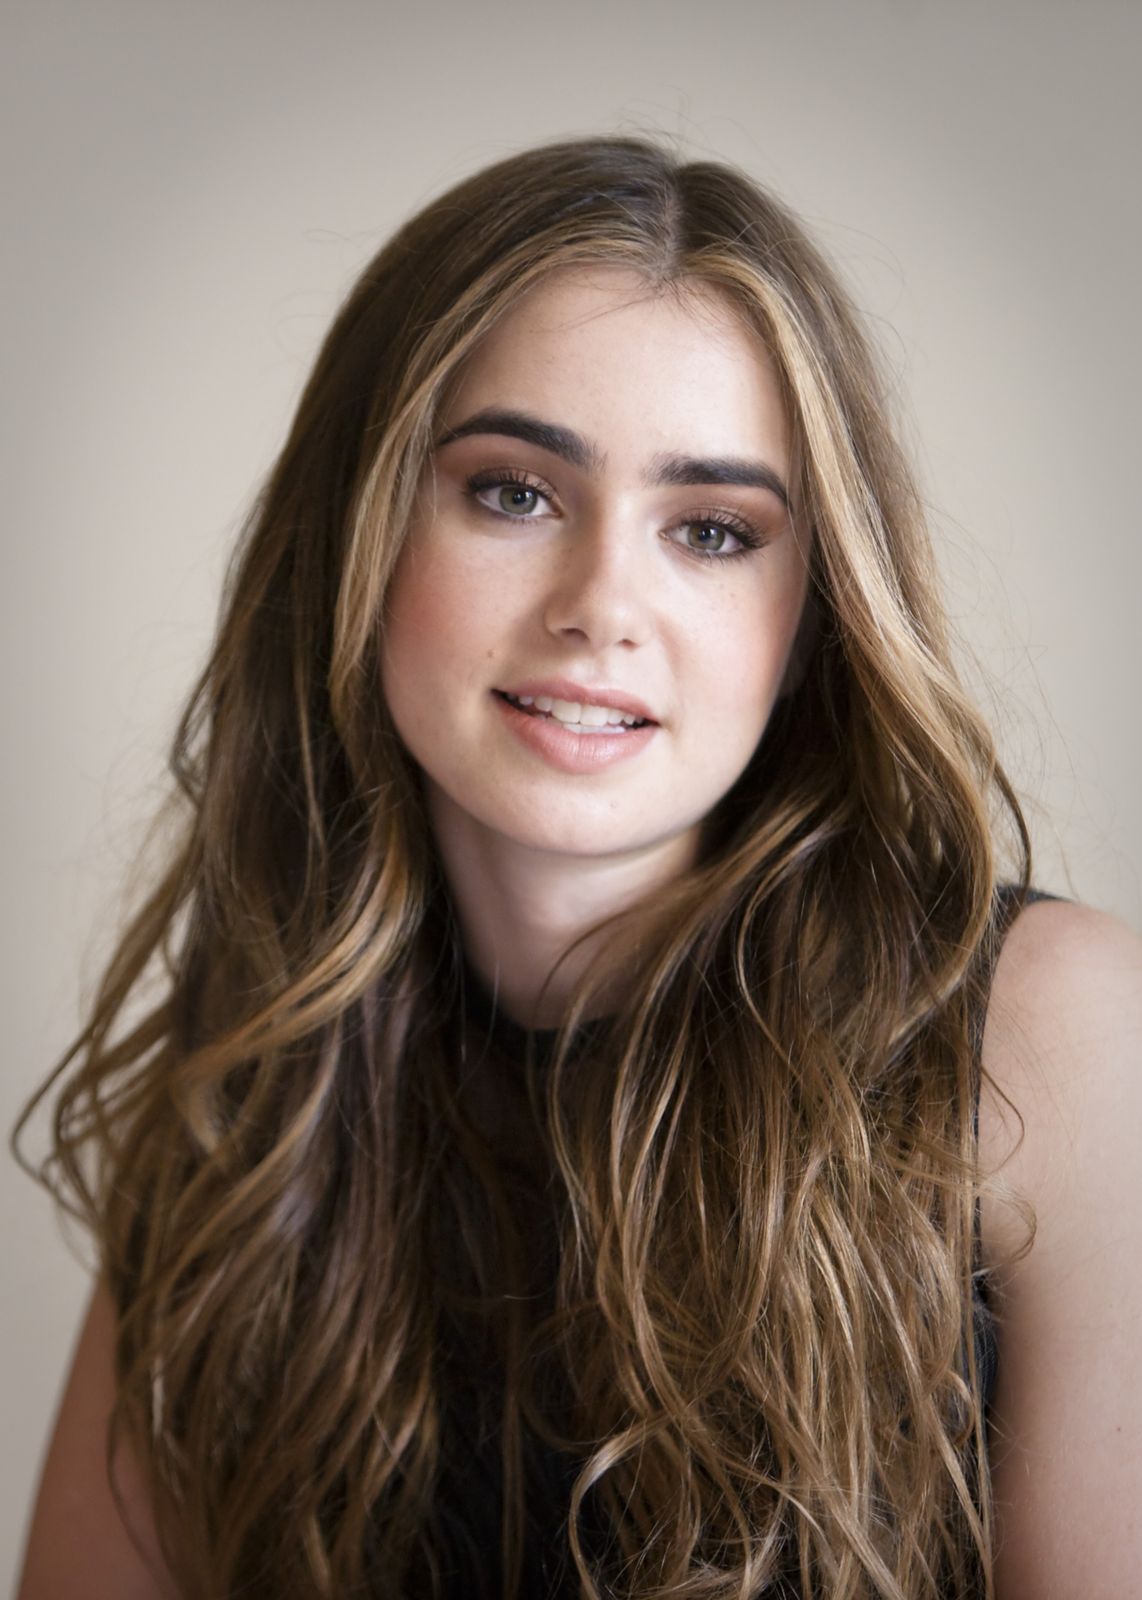 Lily Collins Opens About Struggling With Eating Disorders